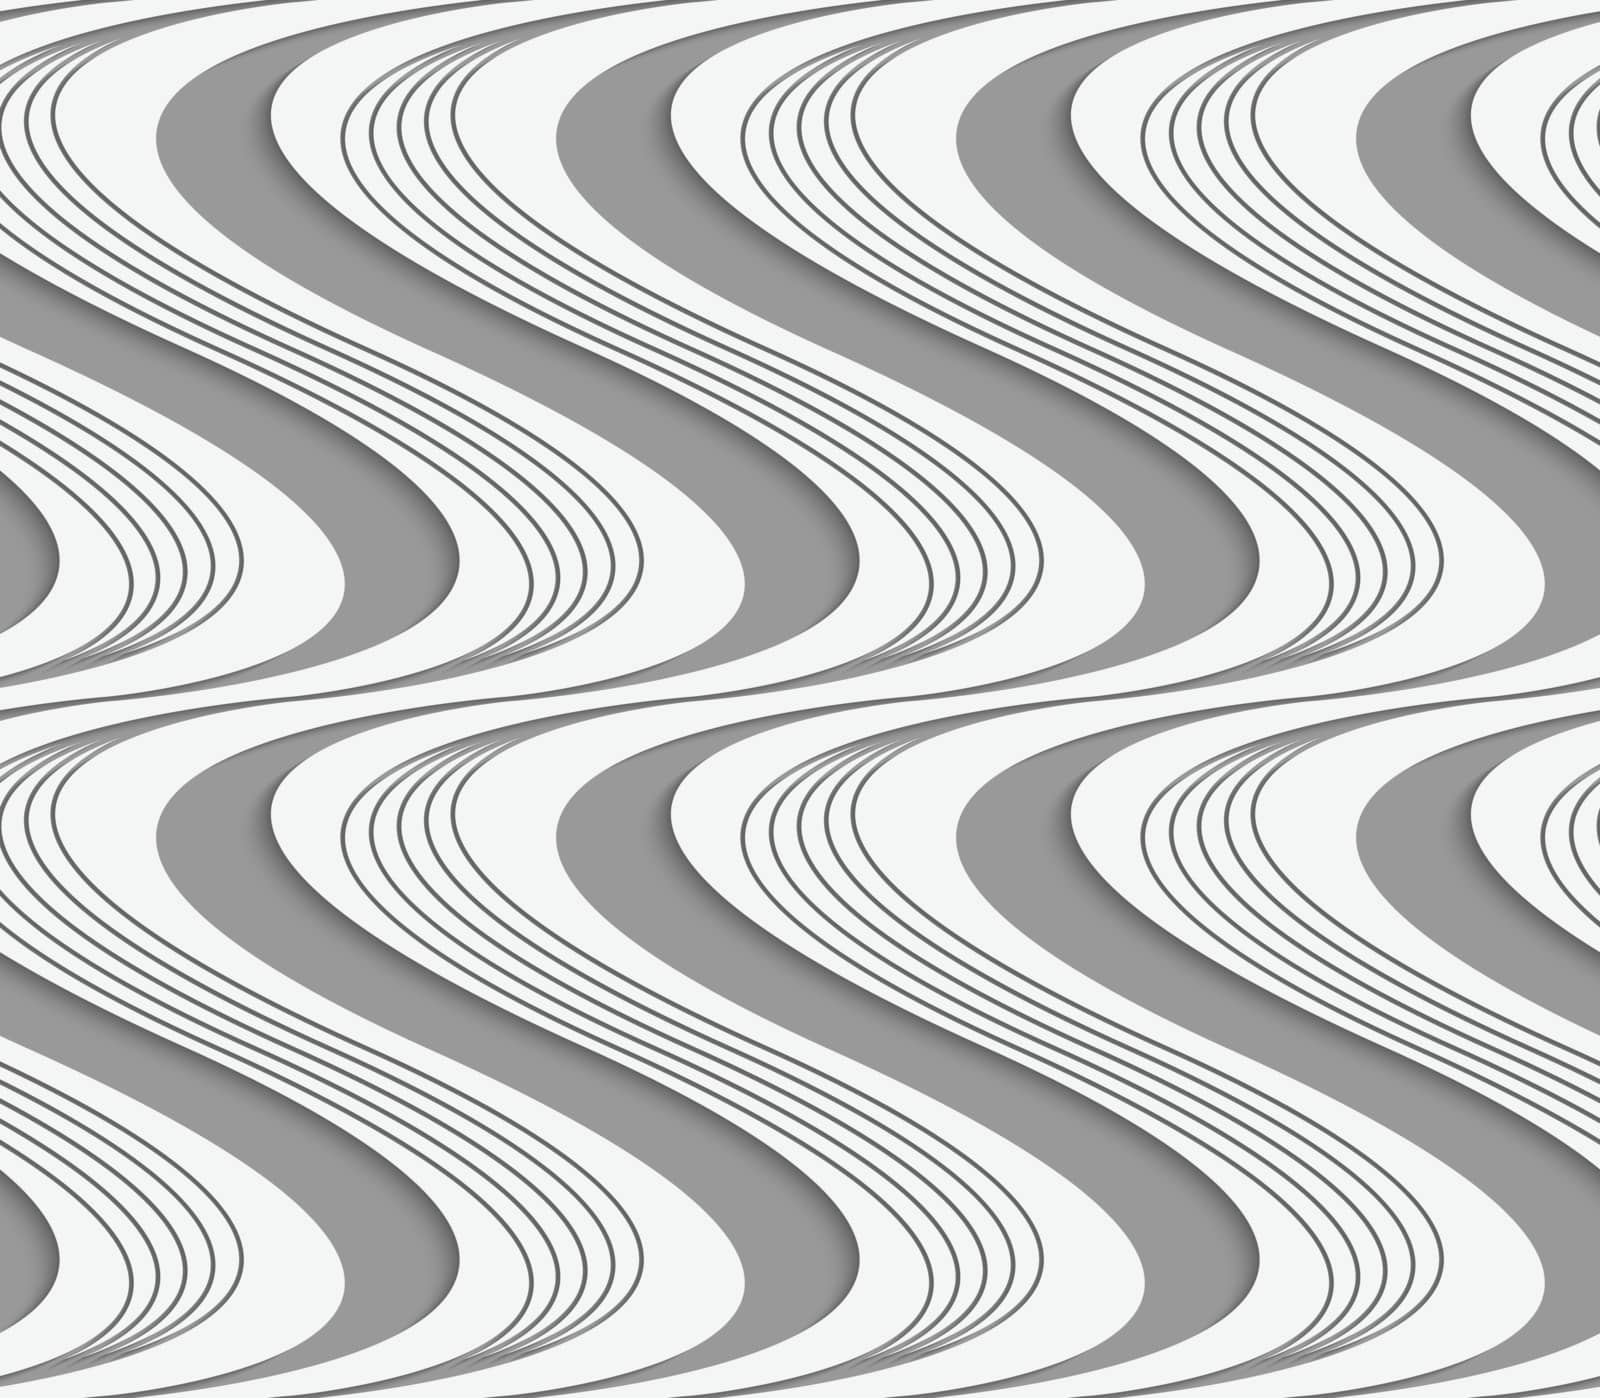 Stylish 3d pattern. Background with paper like perforated effect. Geometric design.Perforated paper with vertical striped and solid waves.